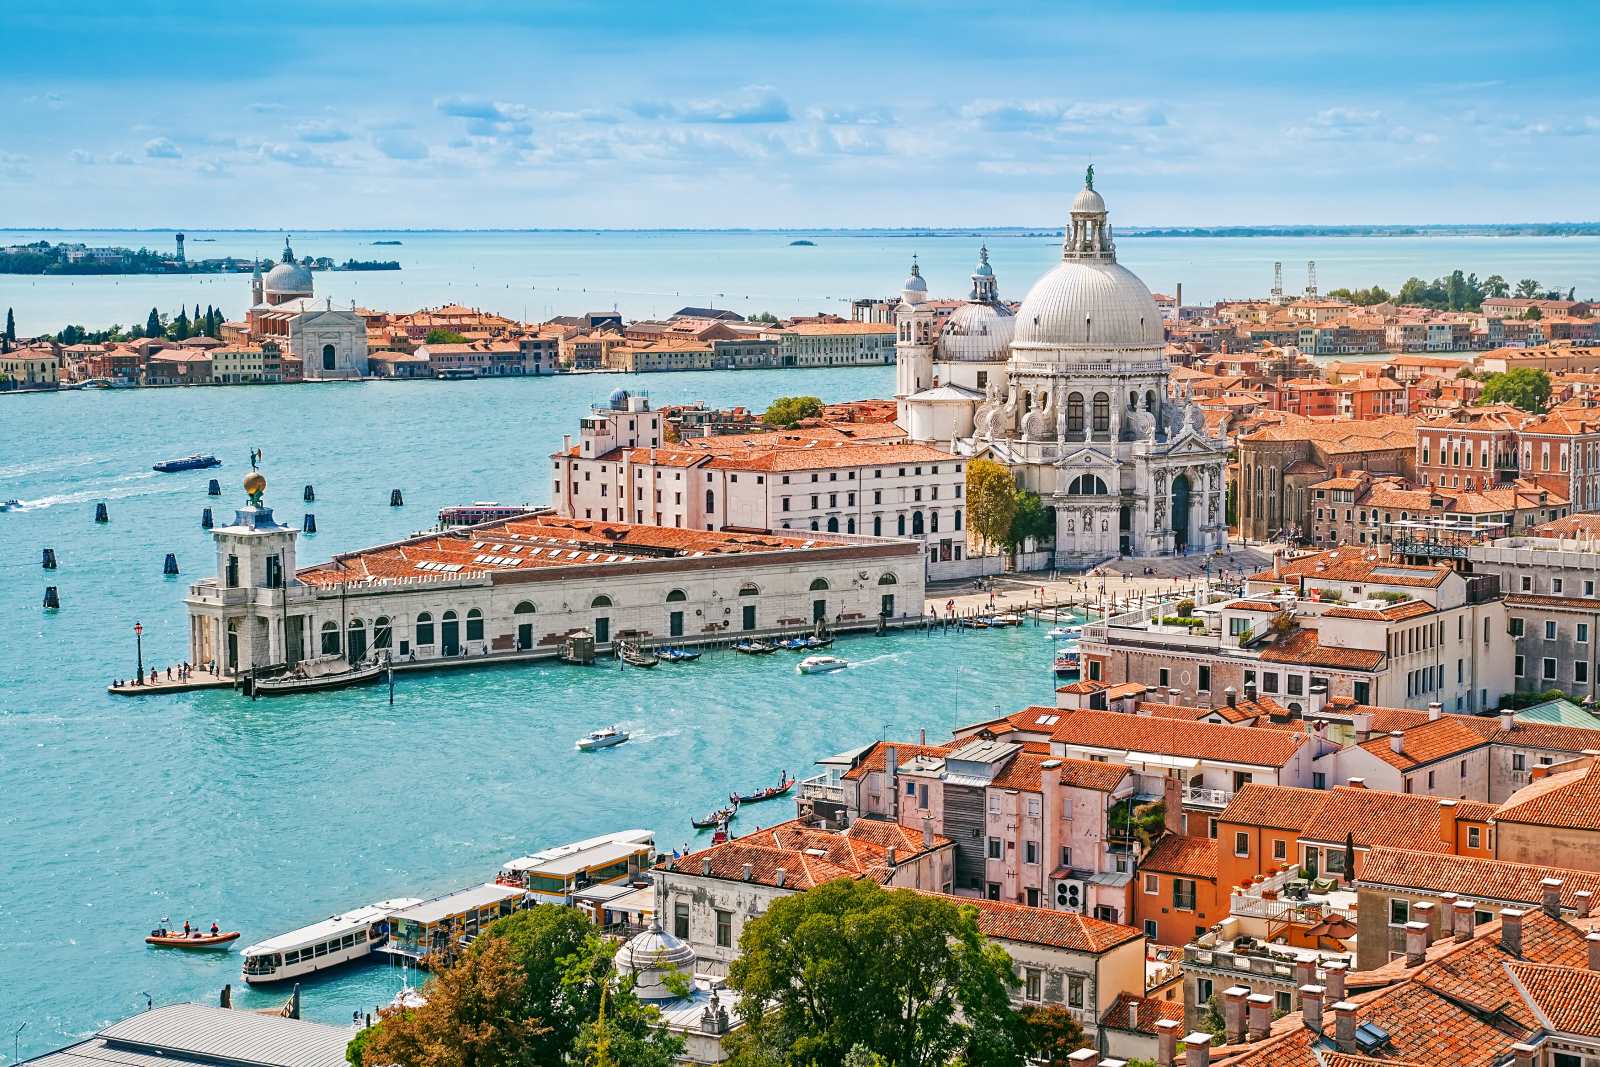 Image Credit: Shutterstock / Pani Garmyder <p><span>“You can’t impose an entrance fee to a city; all they’re doing is transforming it into a theme park,” he told reporters. “This is a bad image for Venice … I mean, are we joking?”</span></p>